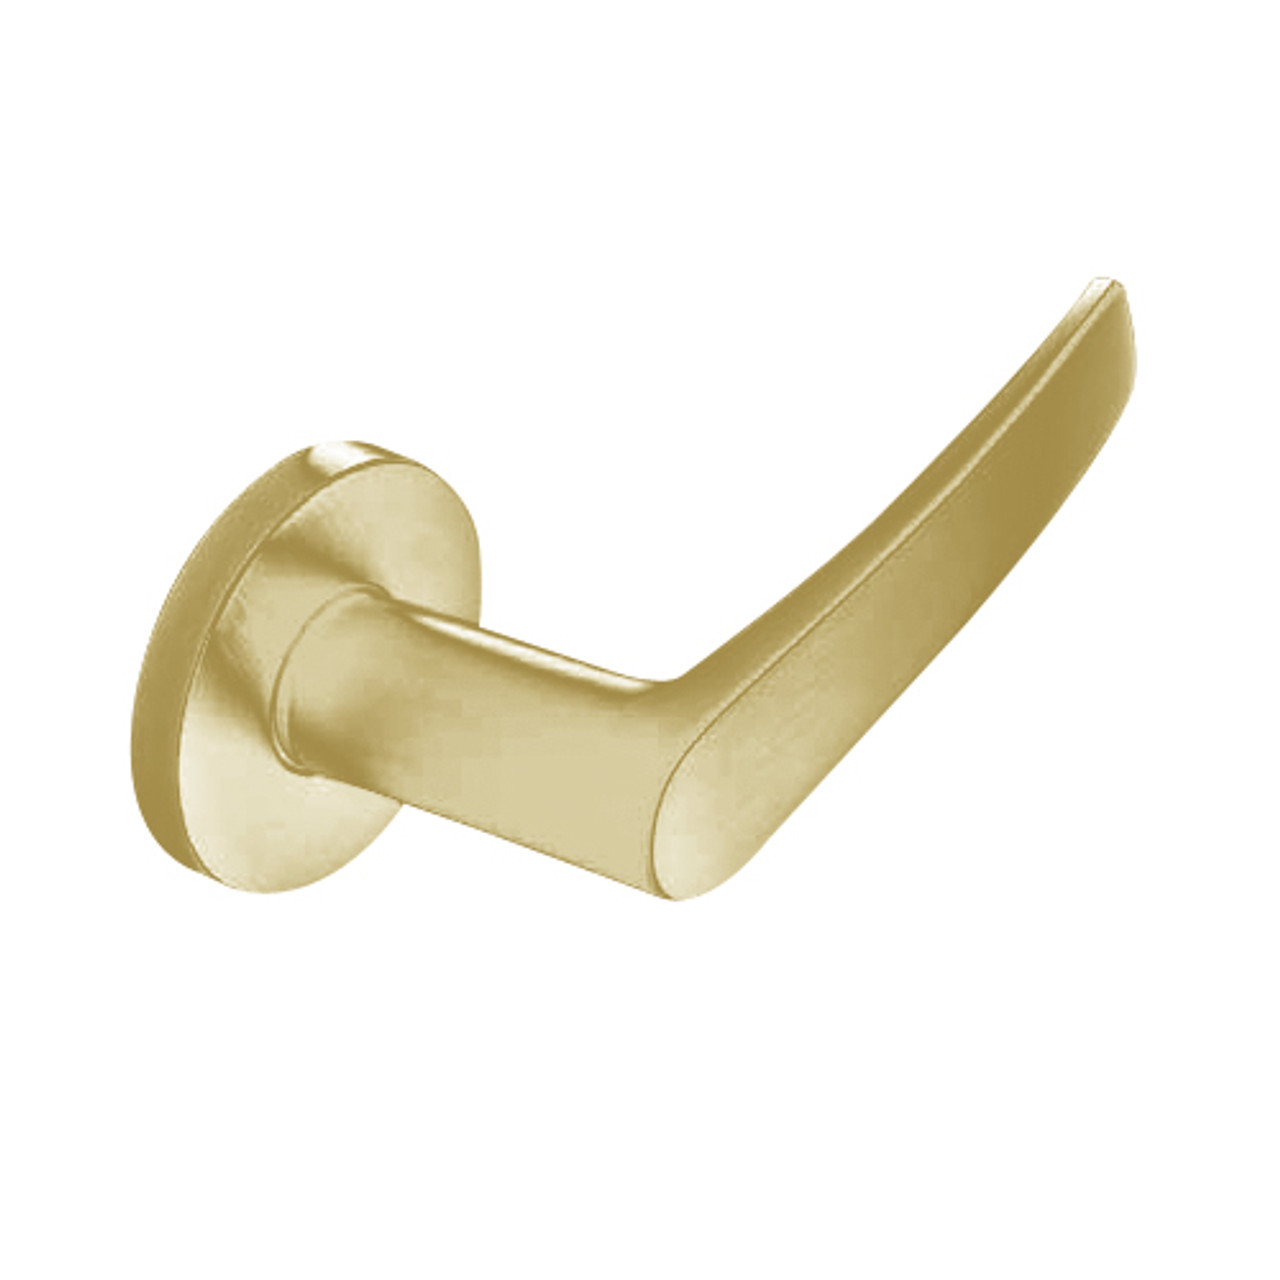 ML2057-ASF-606 Corbin Russwin ML2000 Series Mortise Storeroom Locksets with Armstrong Lever in Satin Brass